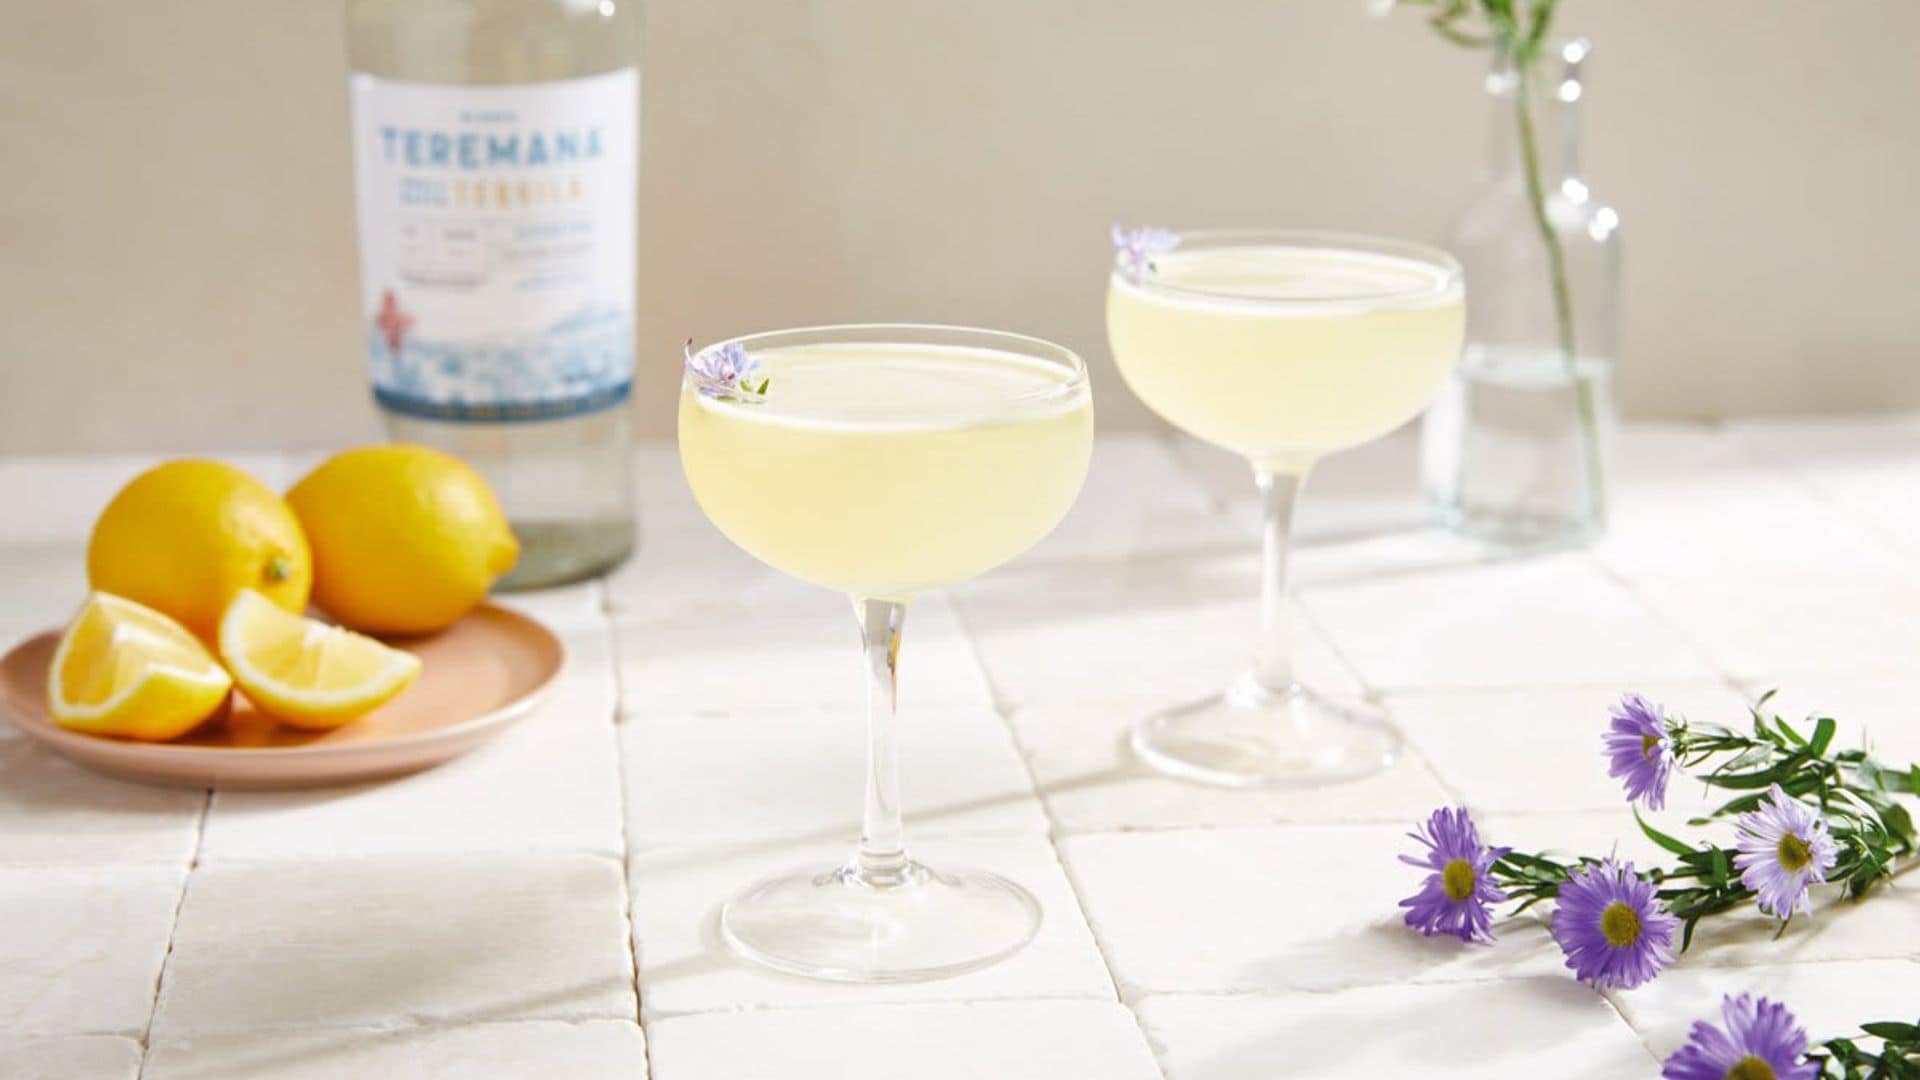 Over 20 cocktails to sip this spring